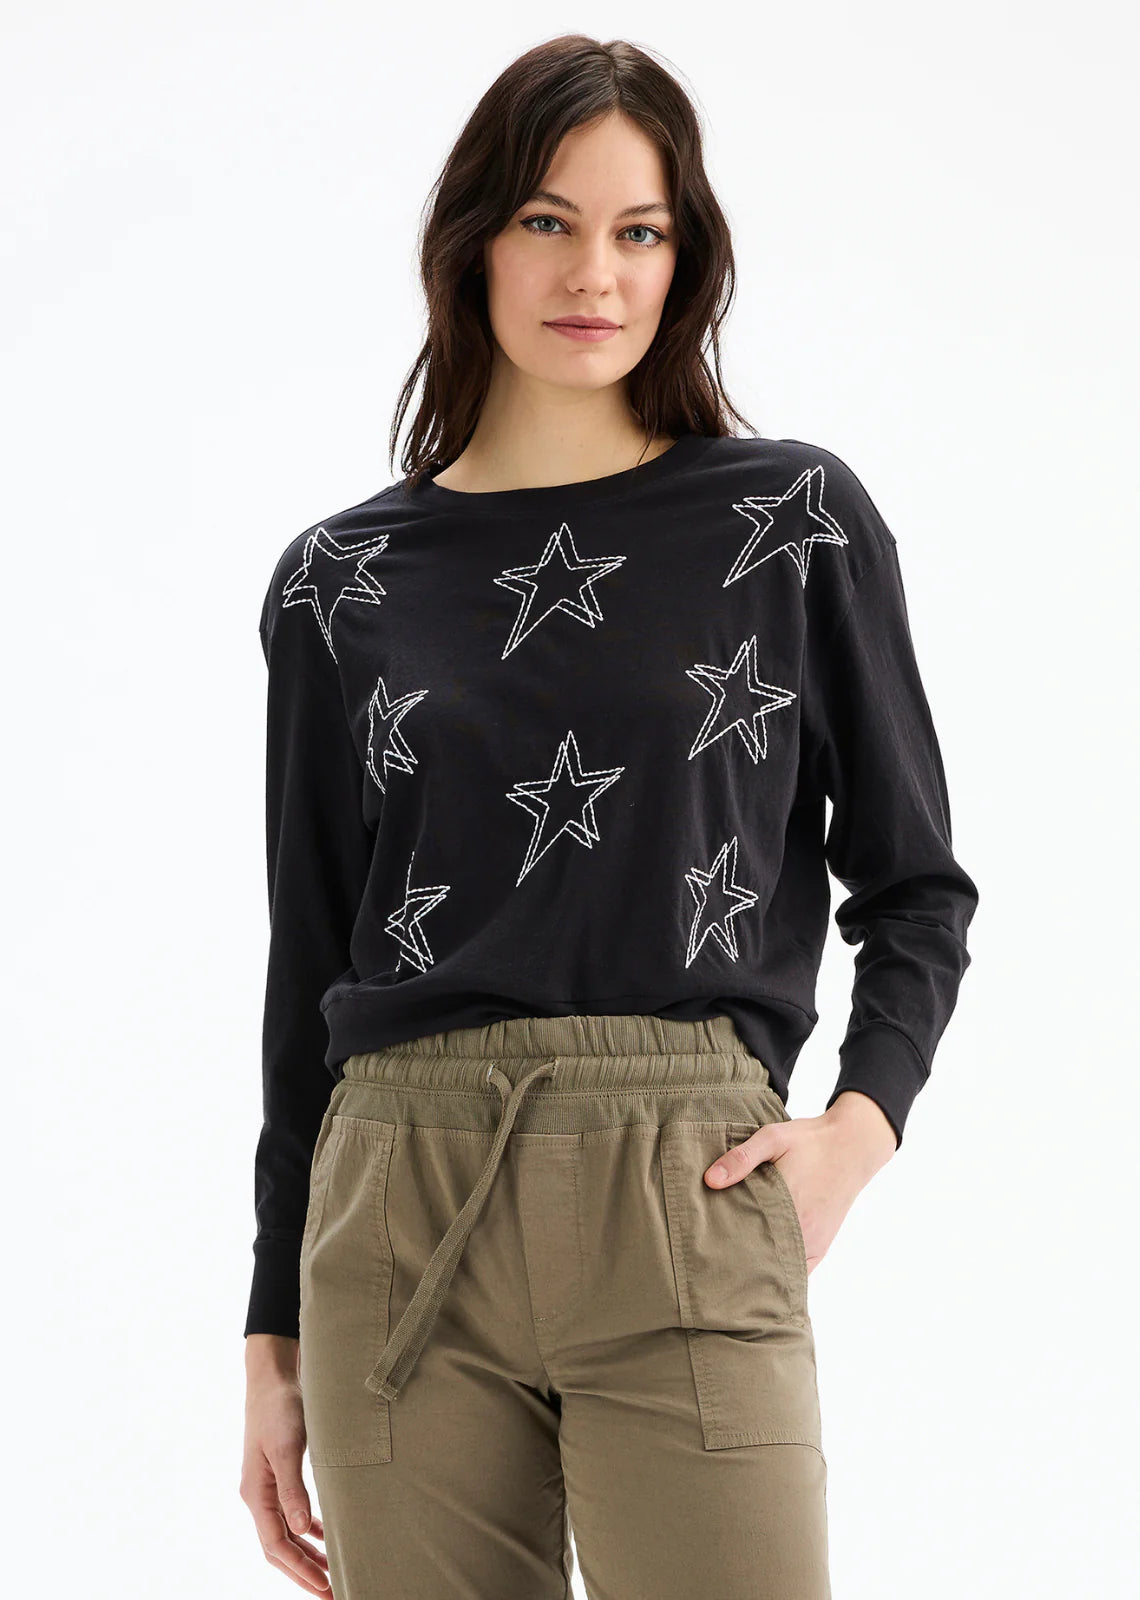 The Double Stars Embroidered Tee